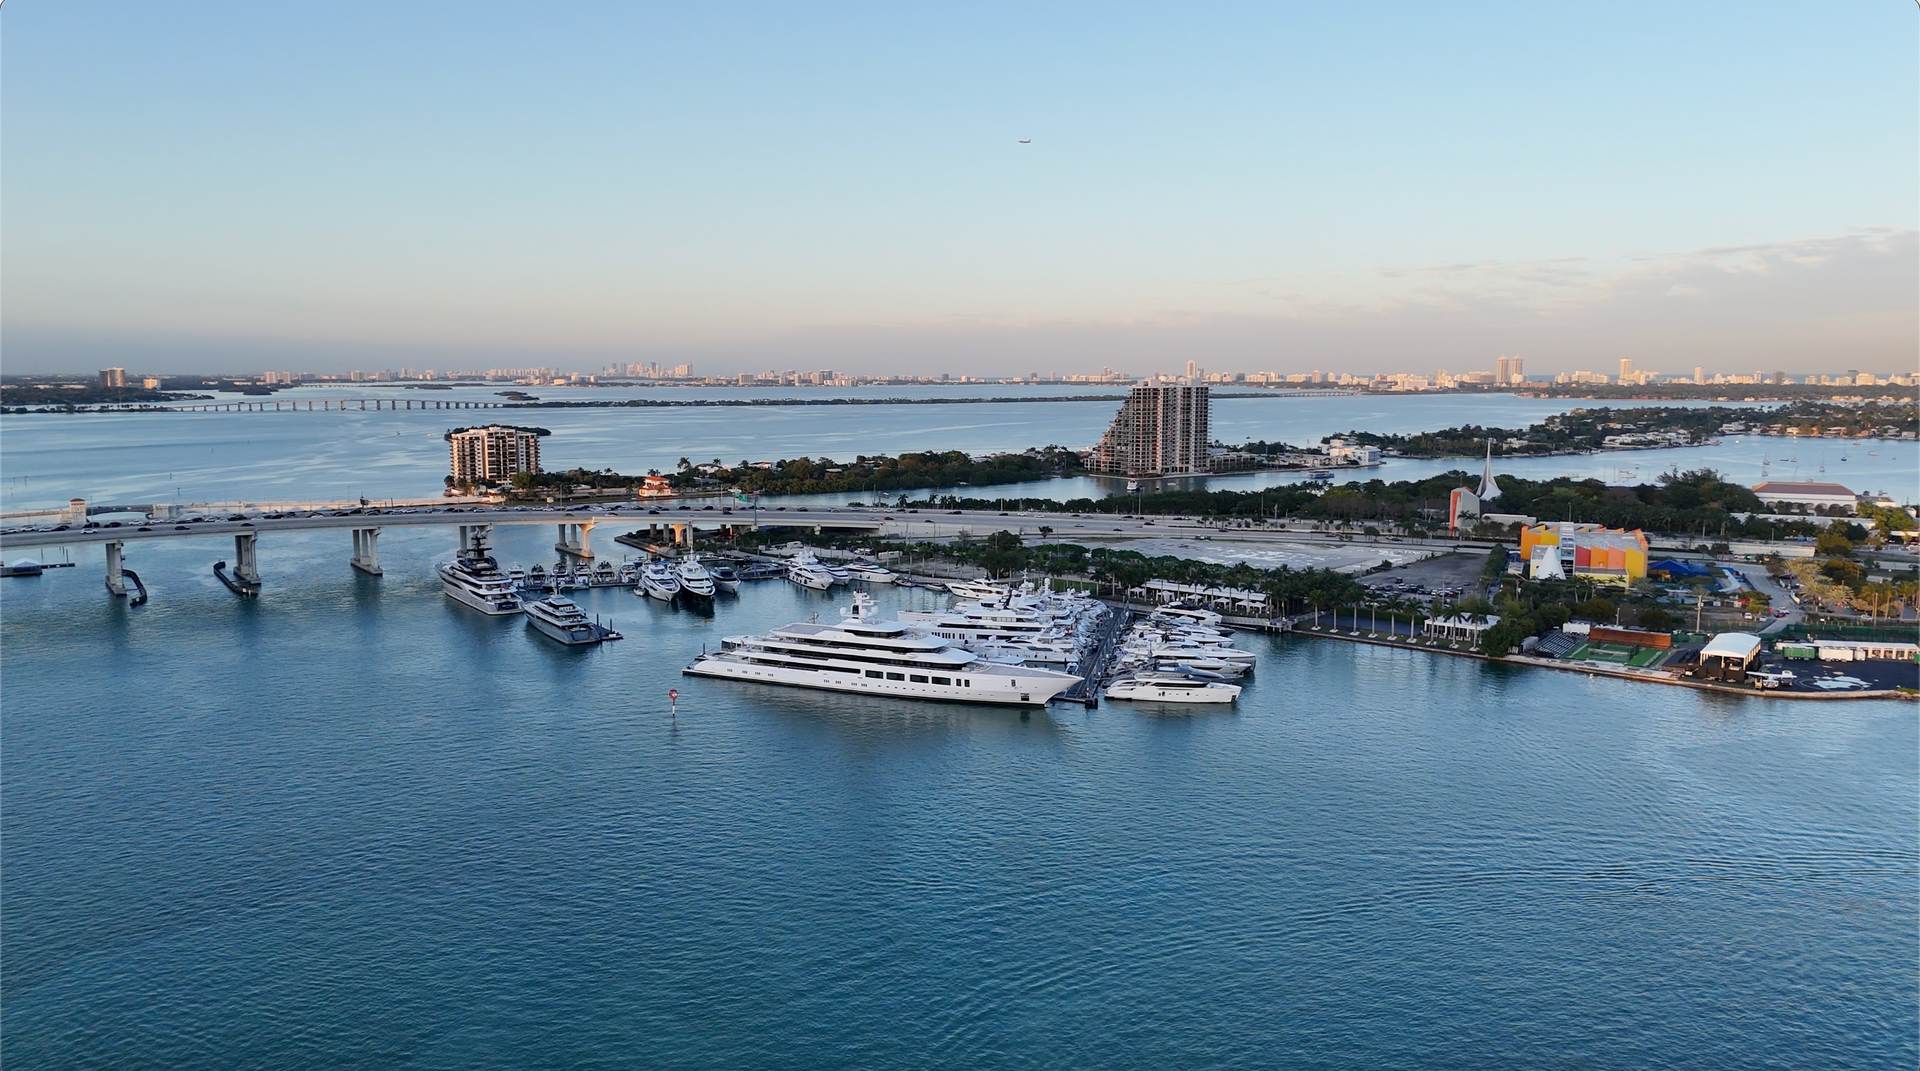 come see star island during the best time and thats on a sunset cruise. Biscayne bay